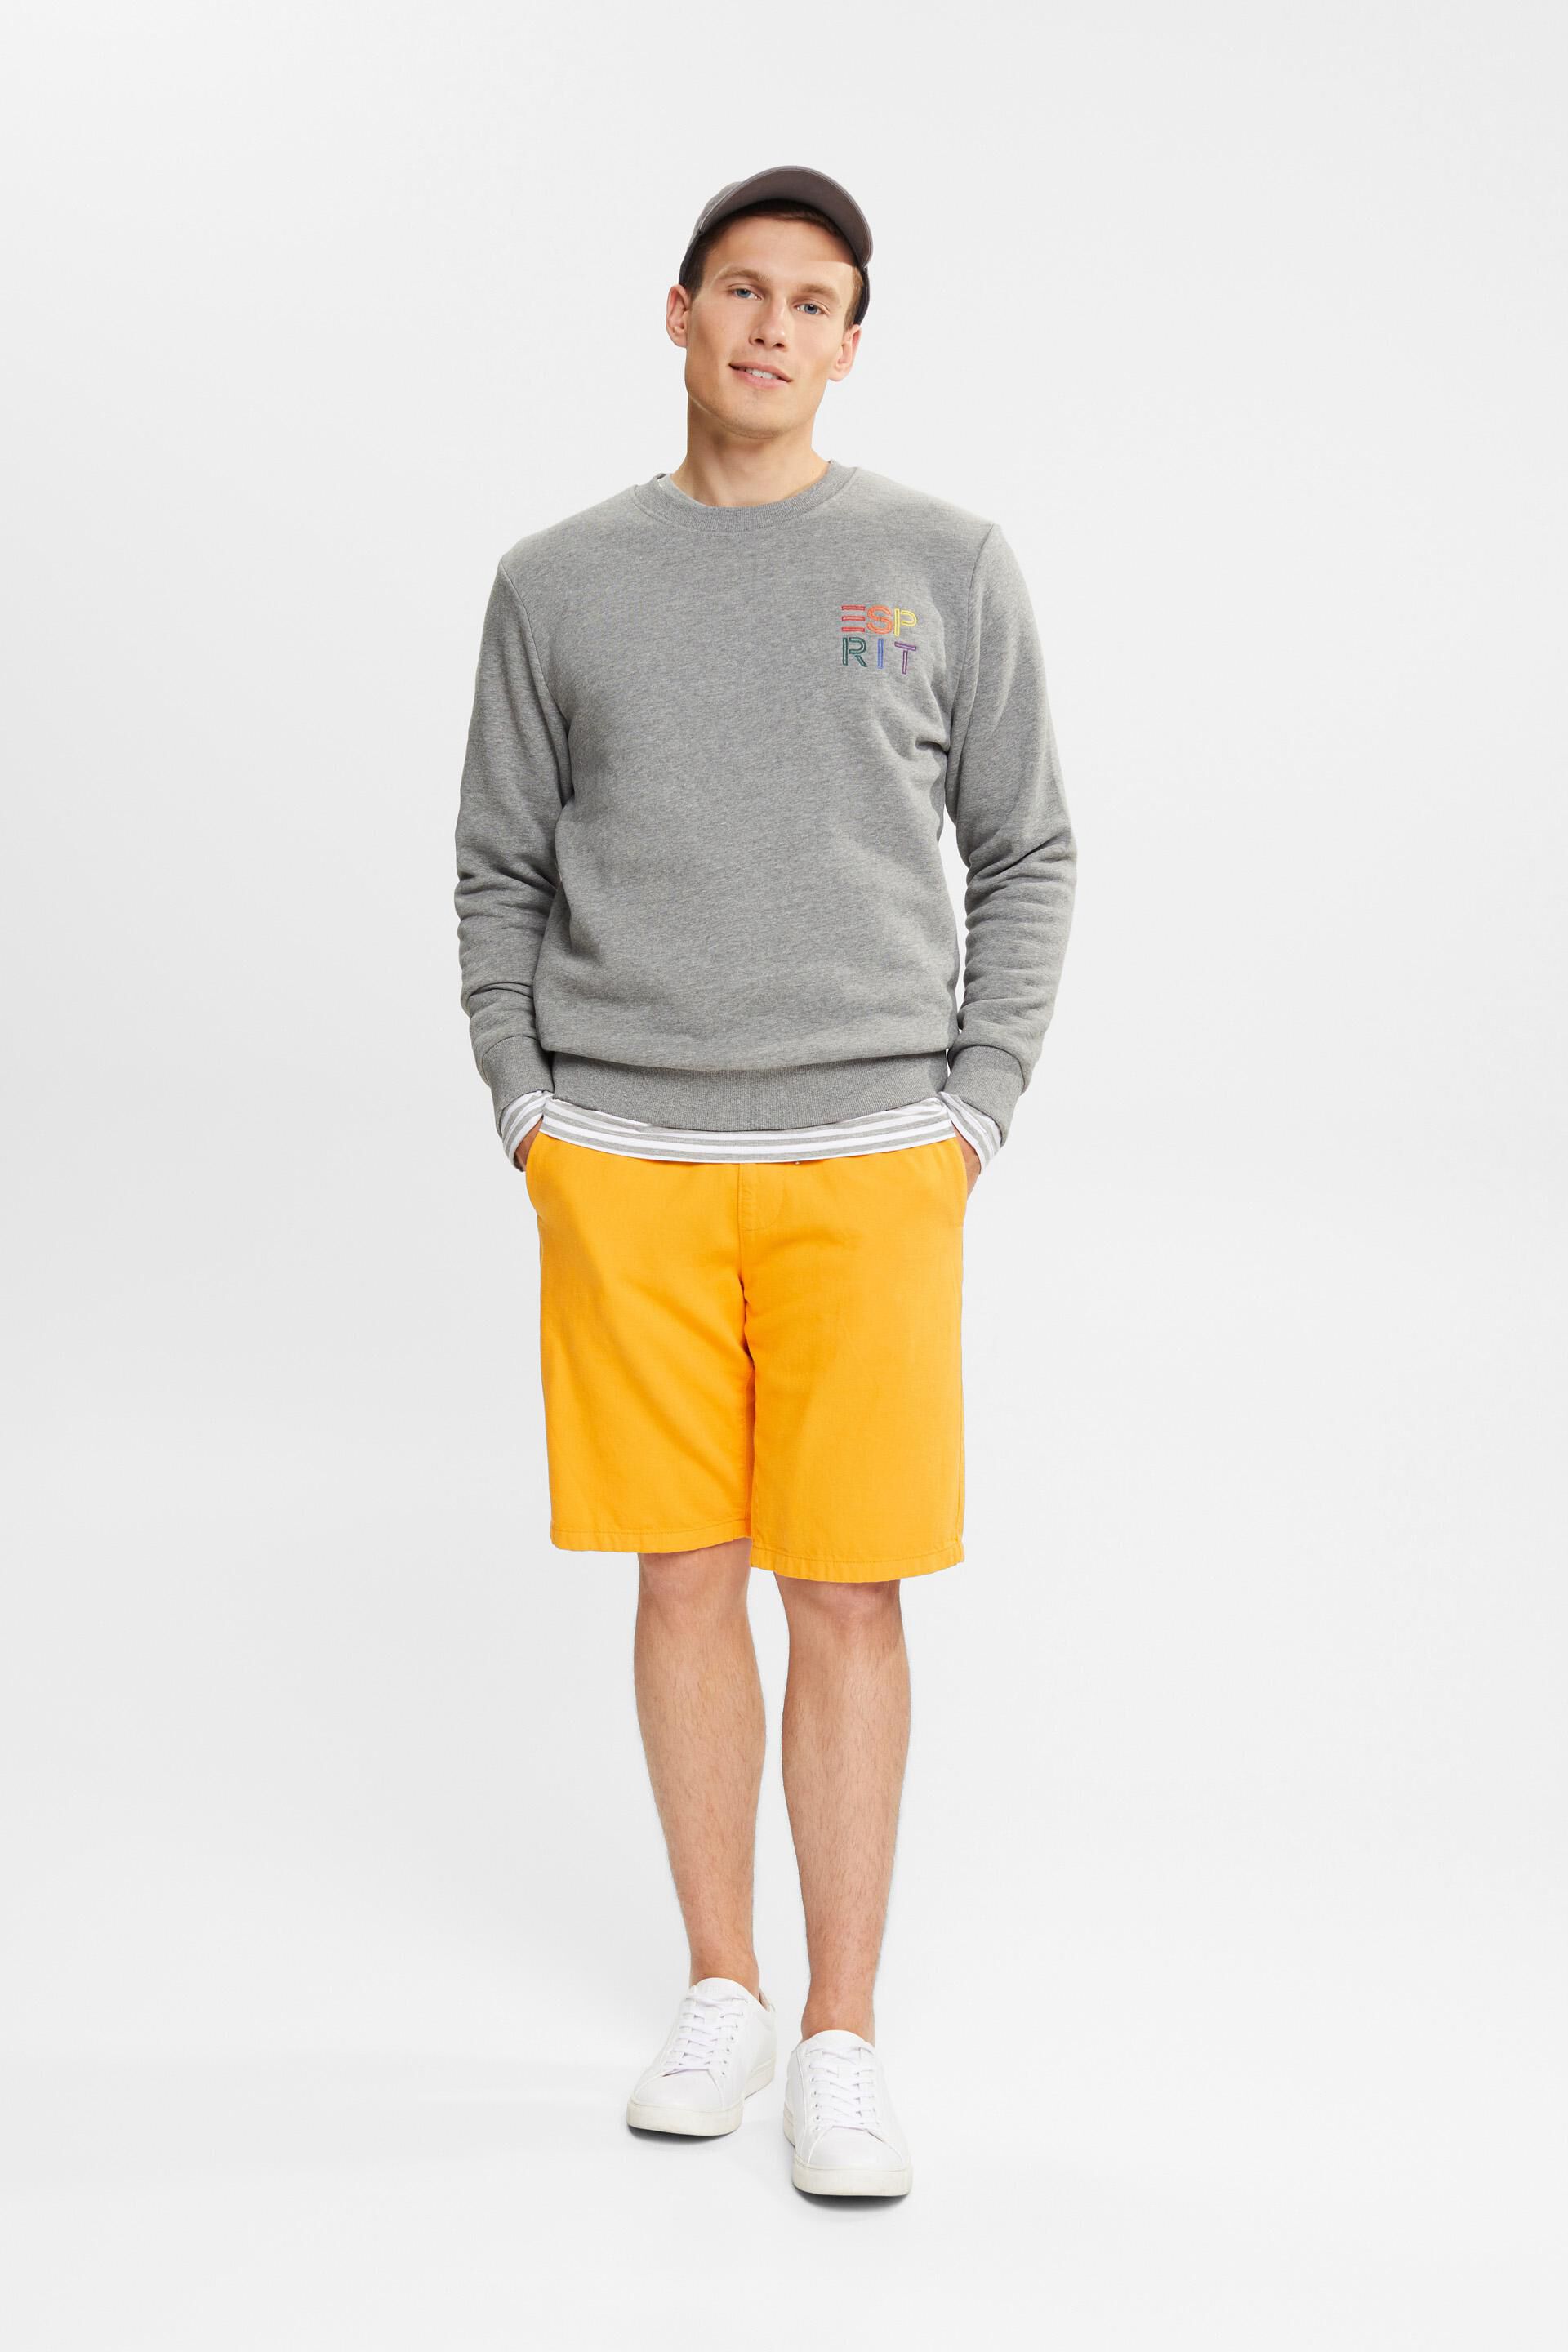 Esprit a Sweatshirt logo embroidered colourful with